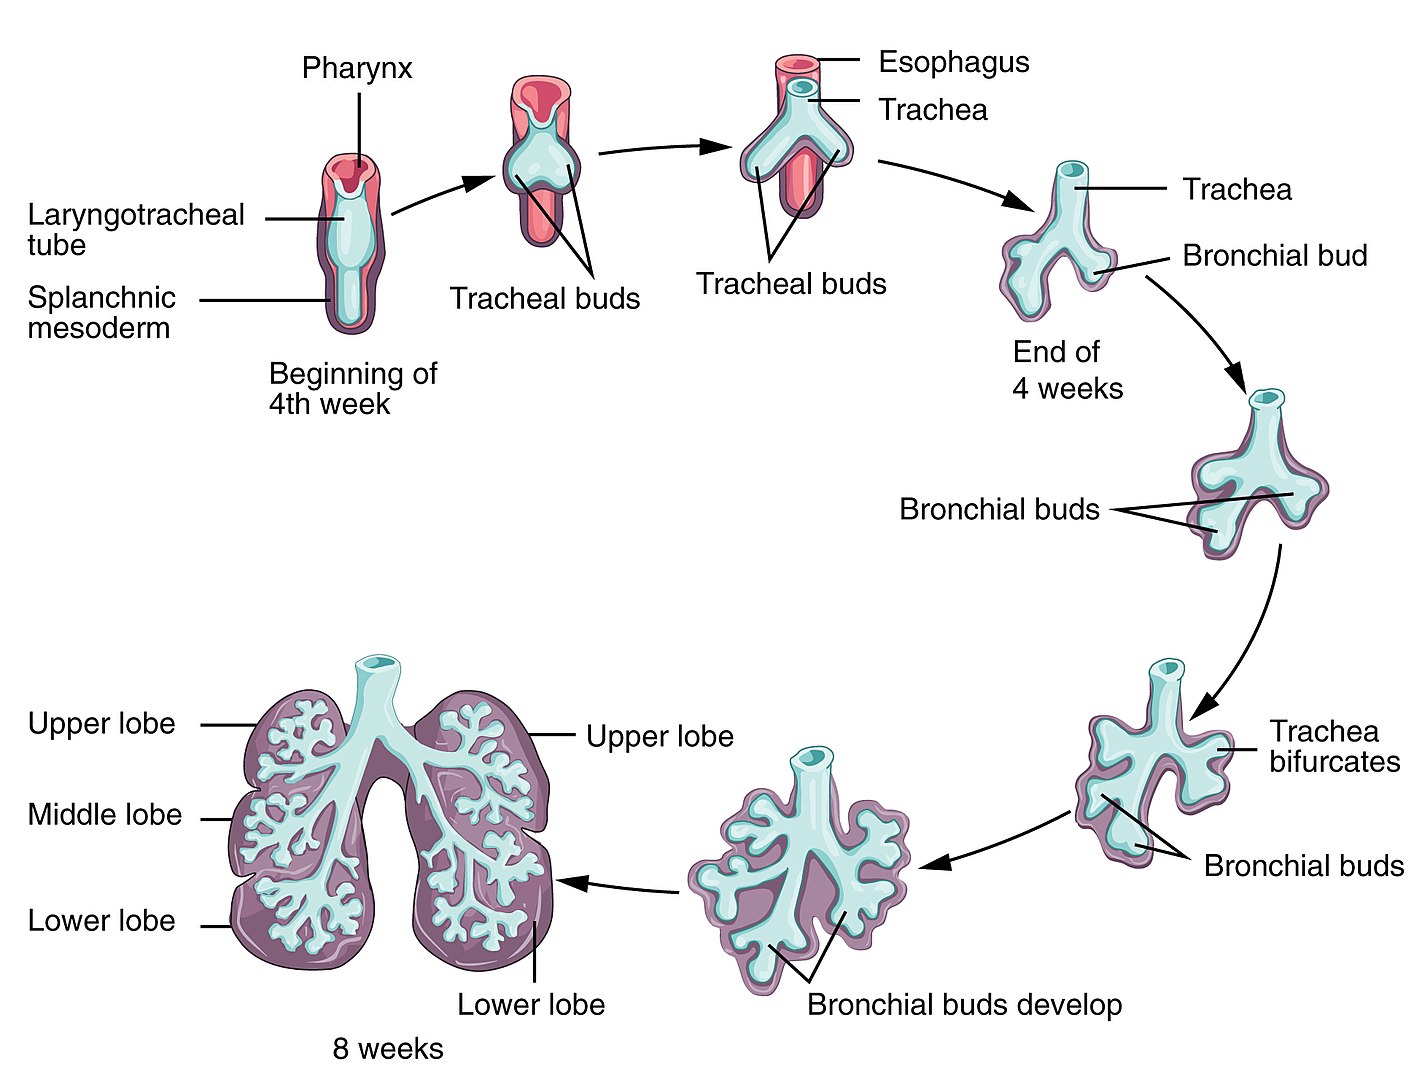 Development of the lungs